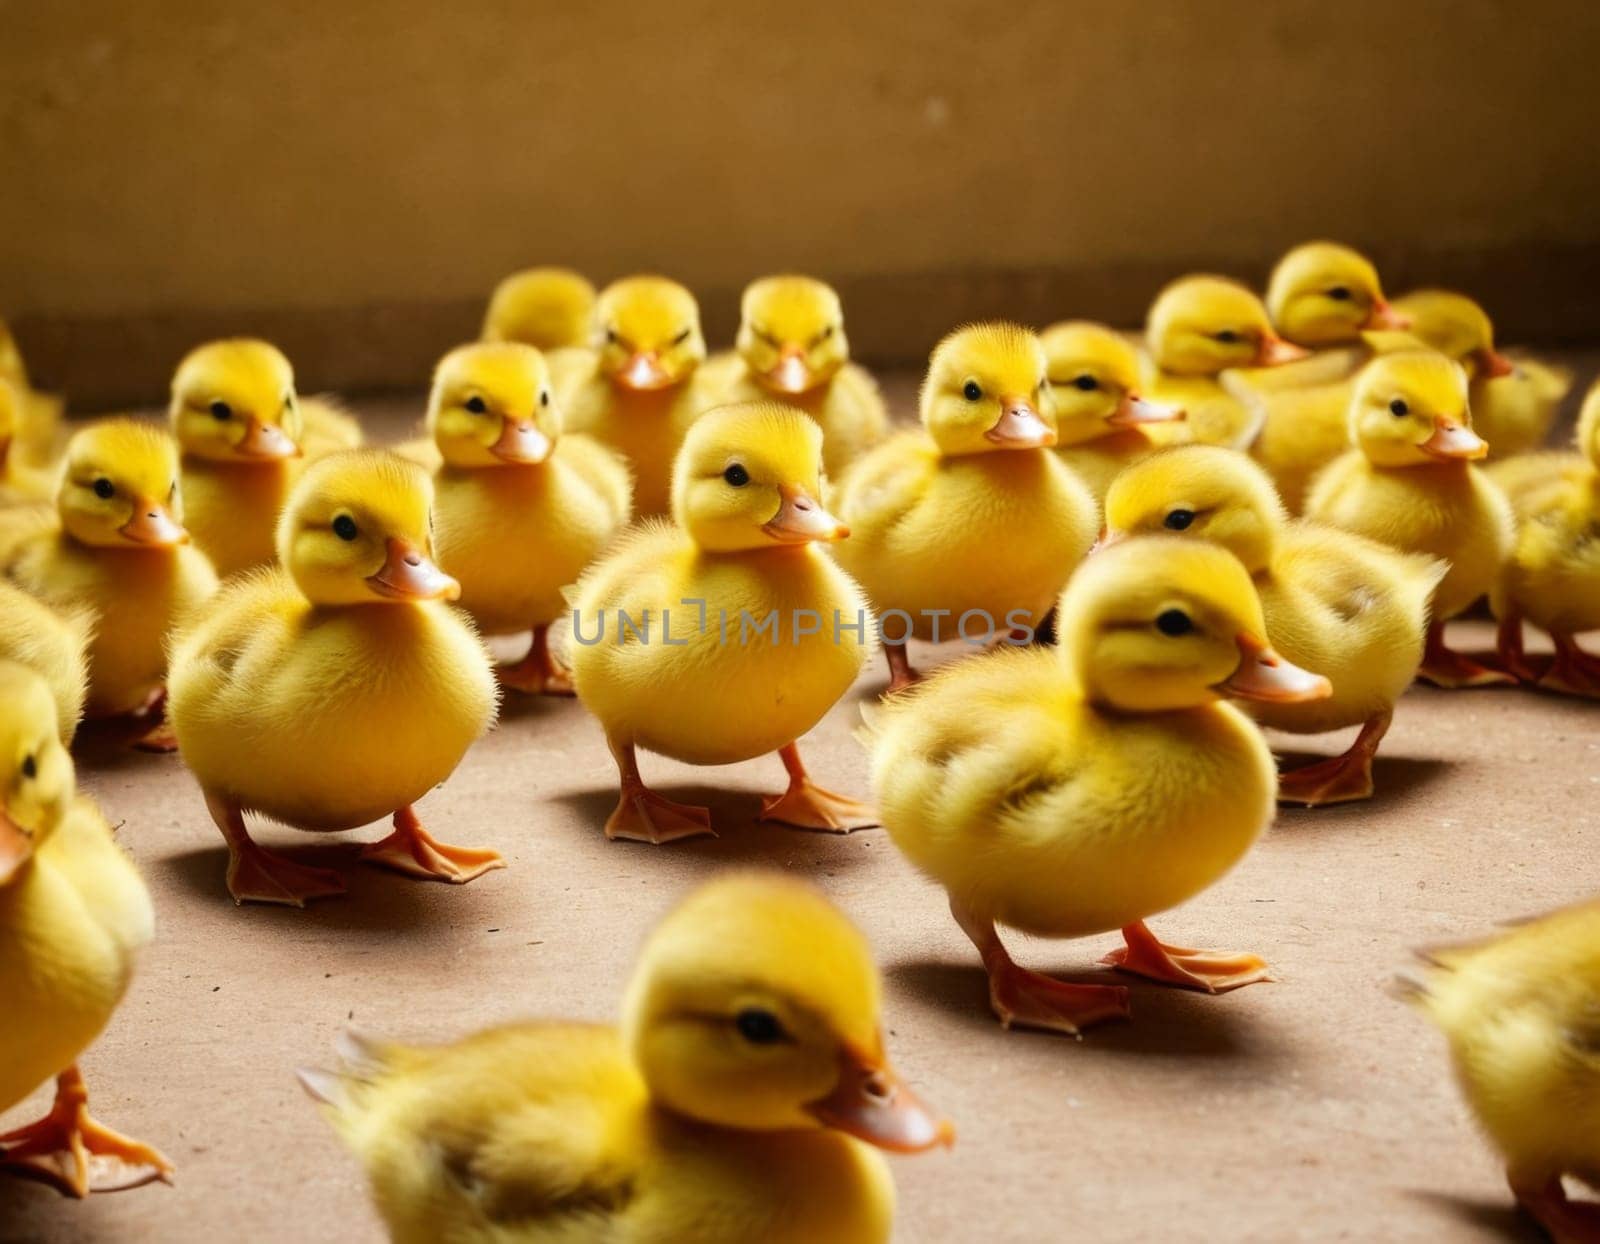 Fluffy yellow ducklings. by vicnt